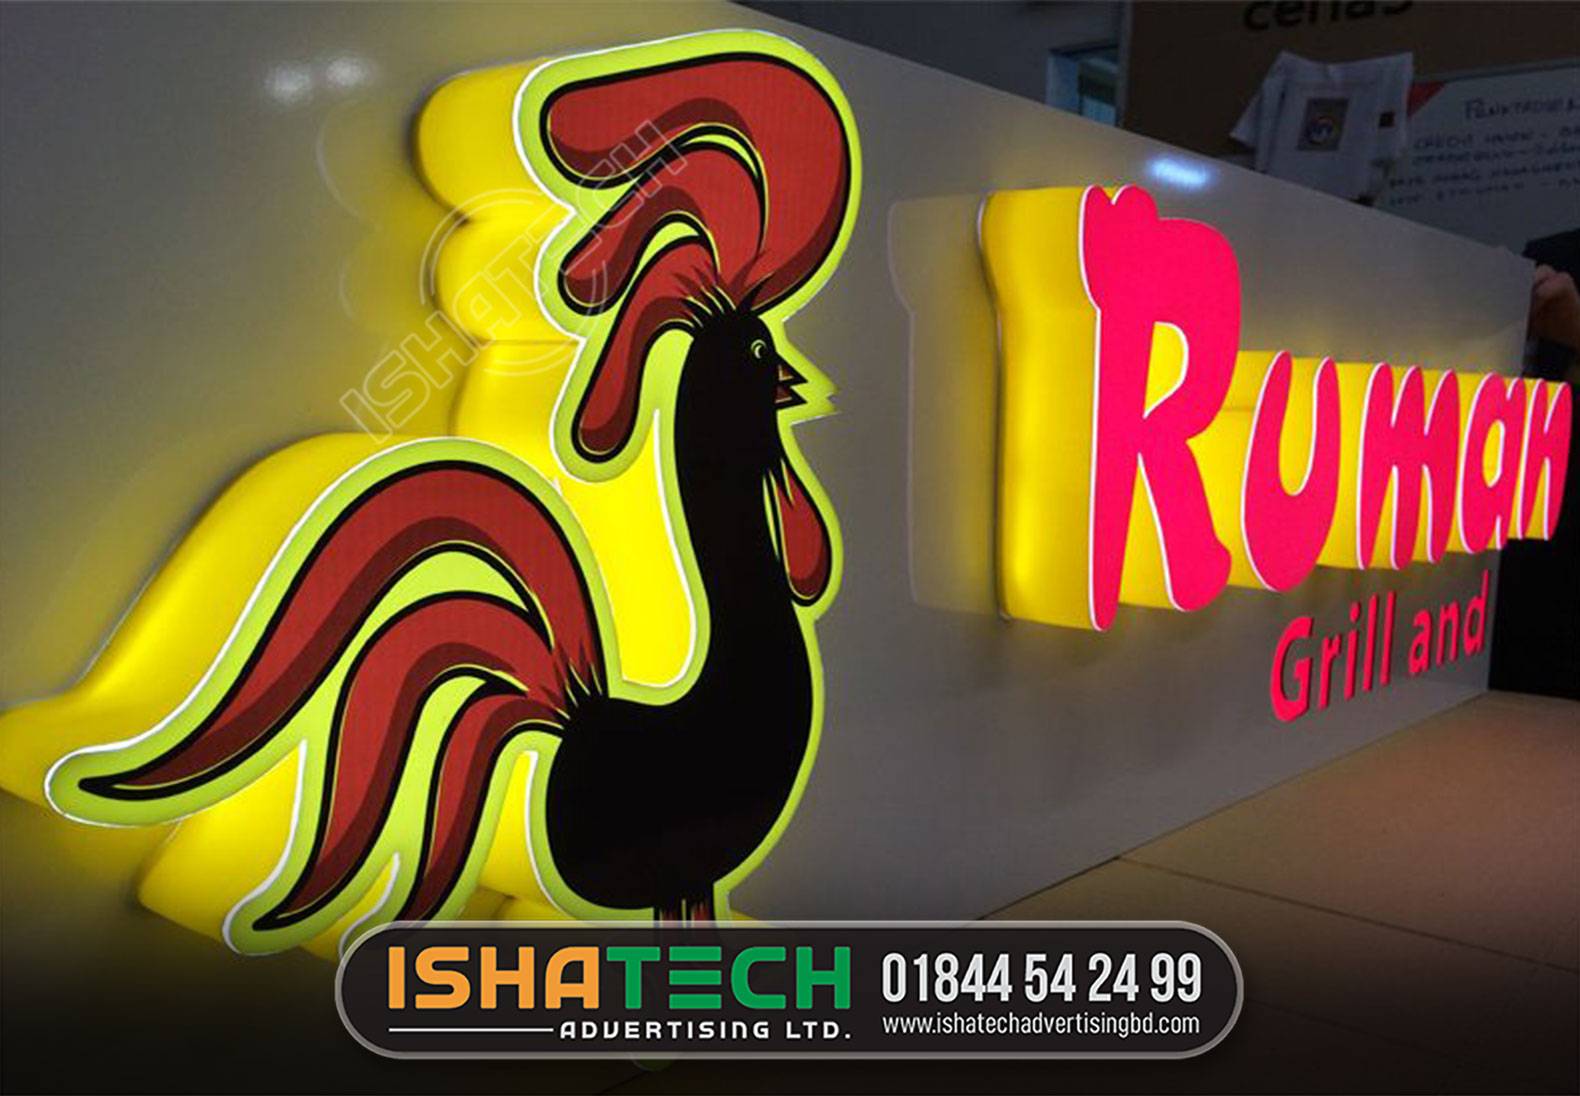 Led Backlight Acrylic Sign, BACK LIGHT ACRYLIC LOGO SIGNS, Led Backlit Logo Signs - Lights And Lighting, 3D Back Light Sign How to Make Signs Backlit Acrylic, Custom frontlit and backlit led acrylic sign letters vinyl face